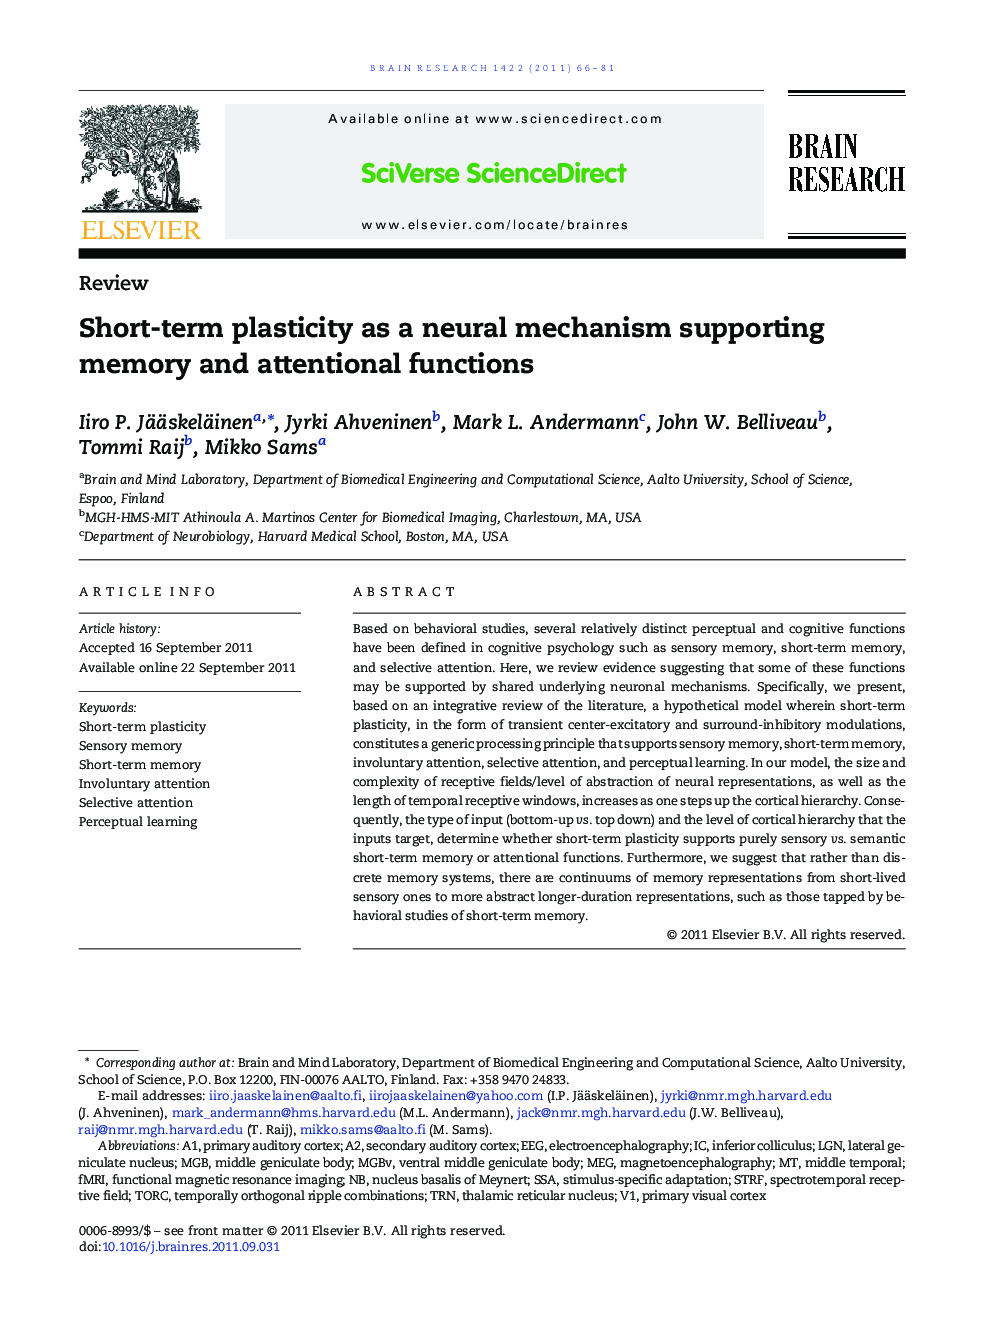 Short-term plasticity as a neural mechanism supporting memory and attentional functions